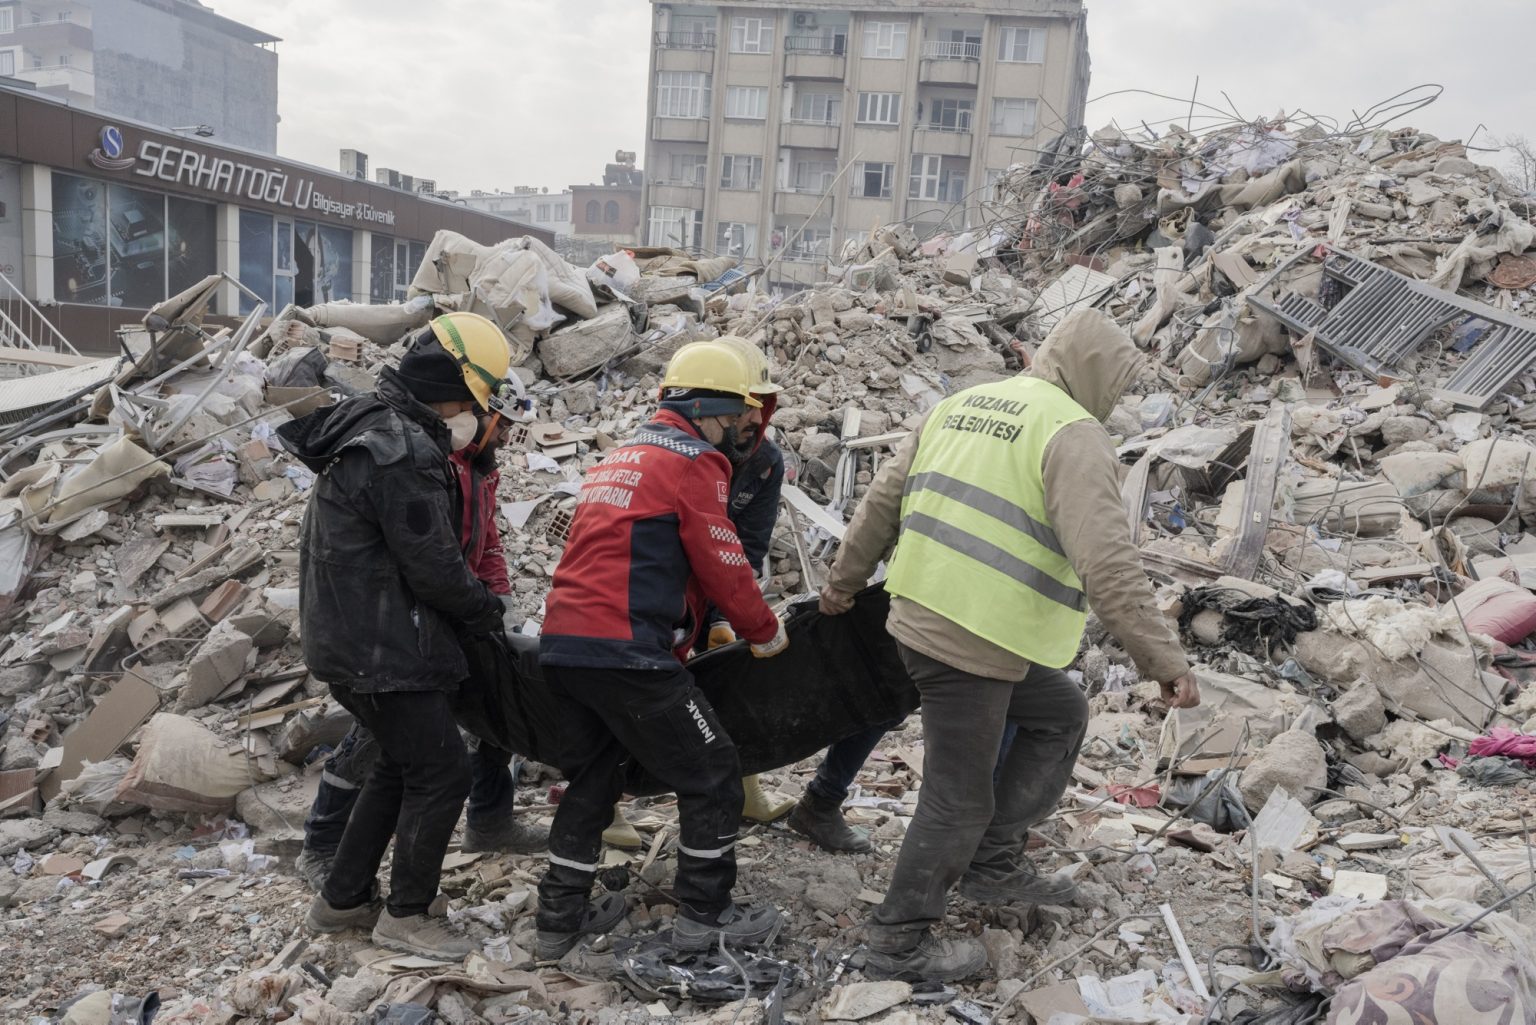 Kahramanmaras¸, Turkey, February 2023 - The aftermath of the earthquake that hit southern Turkey and northern Syria.     Rescuers carry a corpse after pulling it from the rubble. ><
Kahramanmaras¸, Turchia, febbraio 2023  Le conseguenze del terremoto che ha colpito la Turchia del Sud e la Siria del nord.